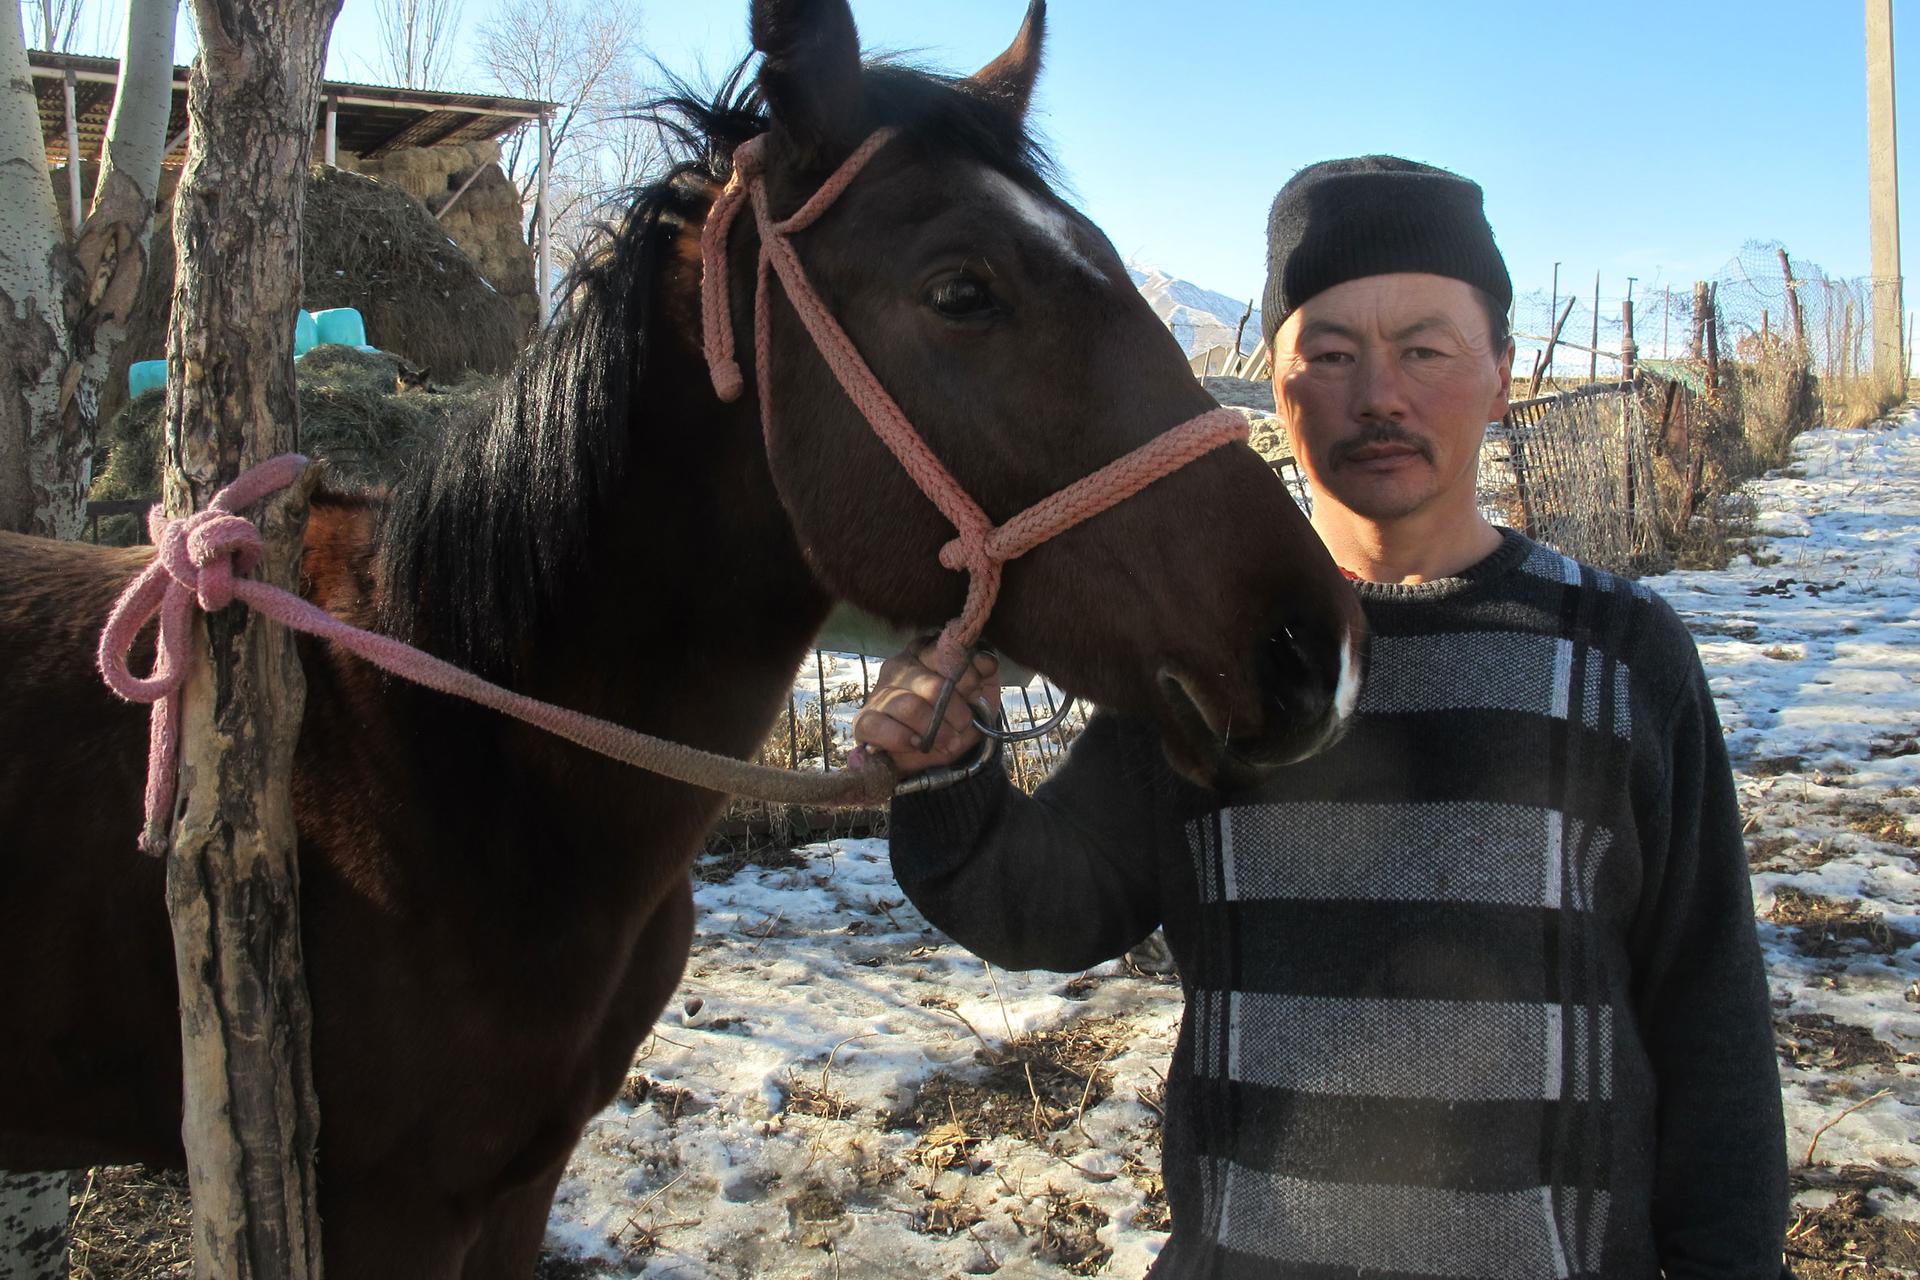 Alim Salavat, 47, of Salkyn Tor, Kyrgyzstan, lost a foal and a calf last summer to a snow leopard attack while herding livestock.